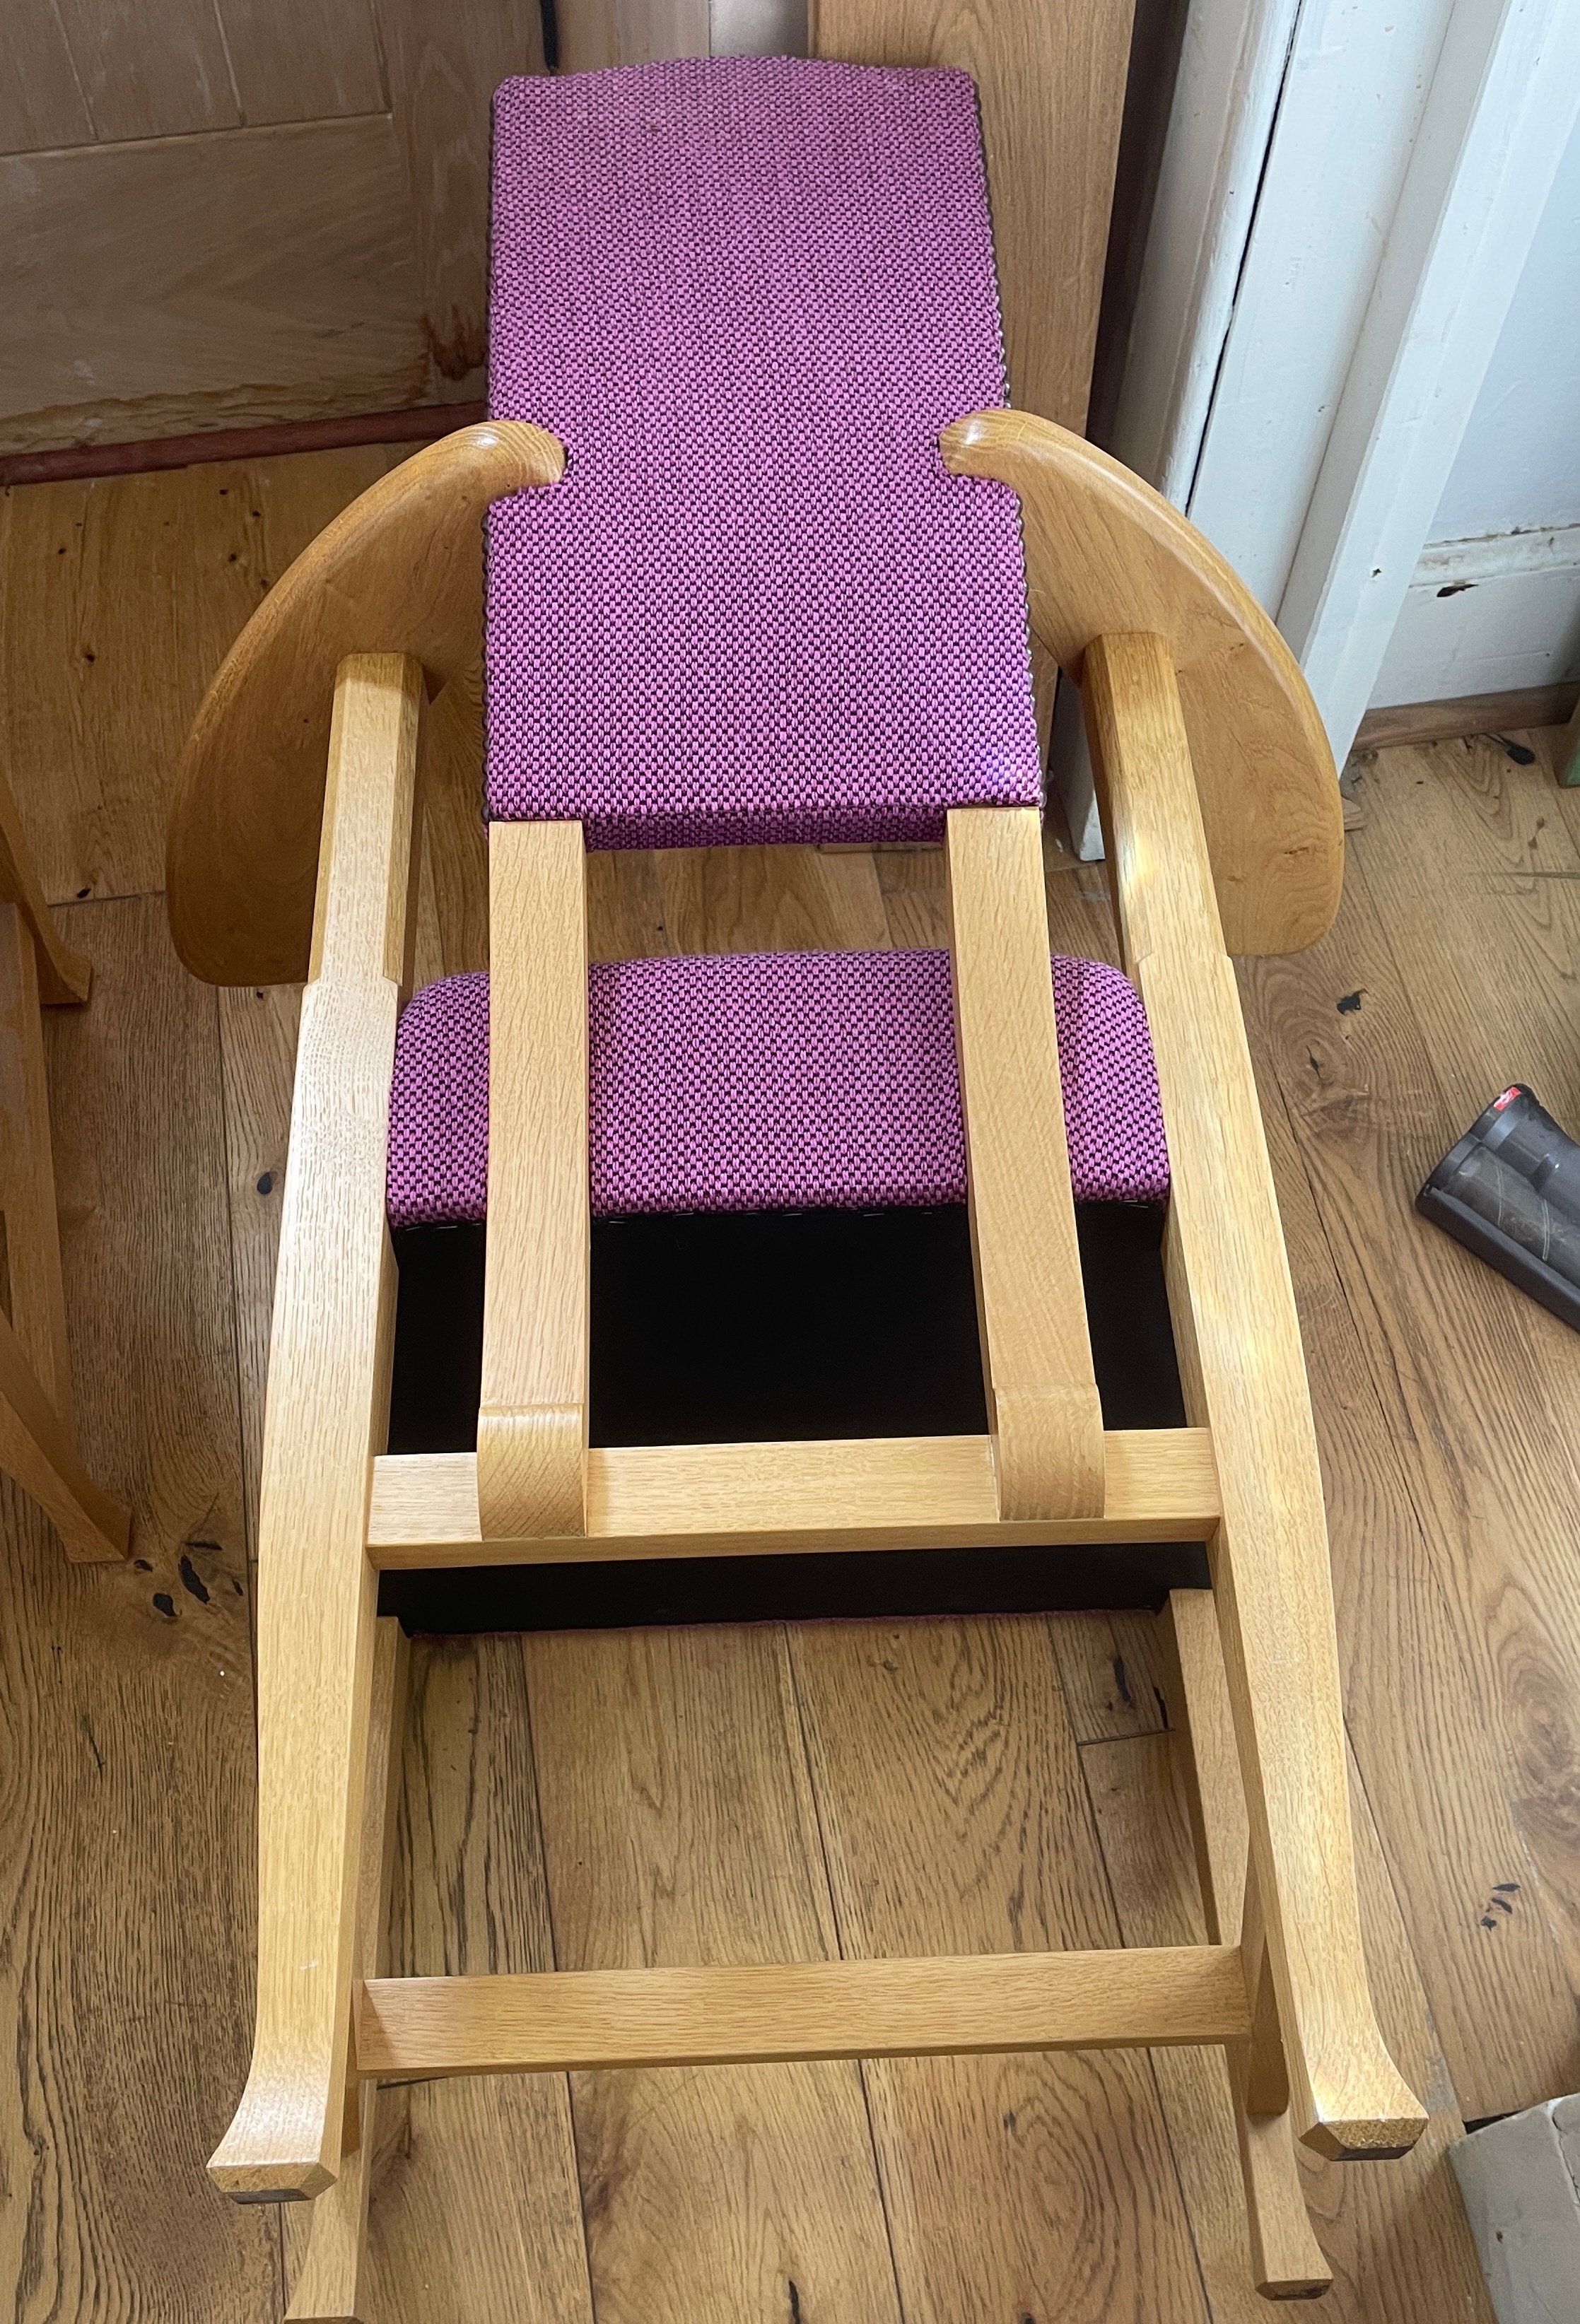 Gavin Robertson Bespoke Furniture Maker Pair of Arts Crafts Style Chairs in Oak - 37" tall seat 21" - Image 4 of 7